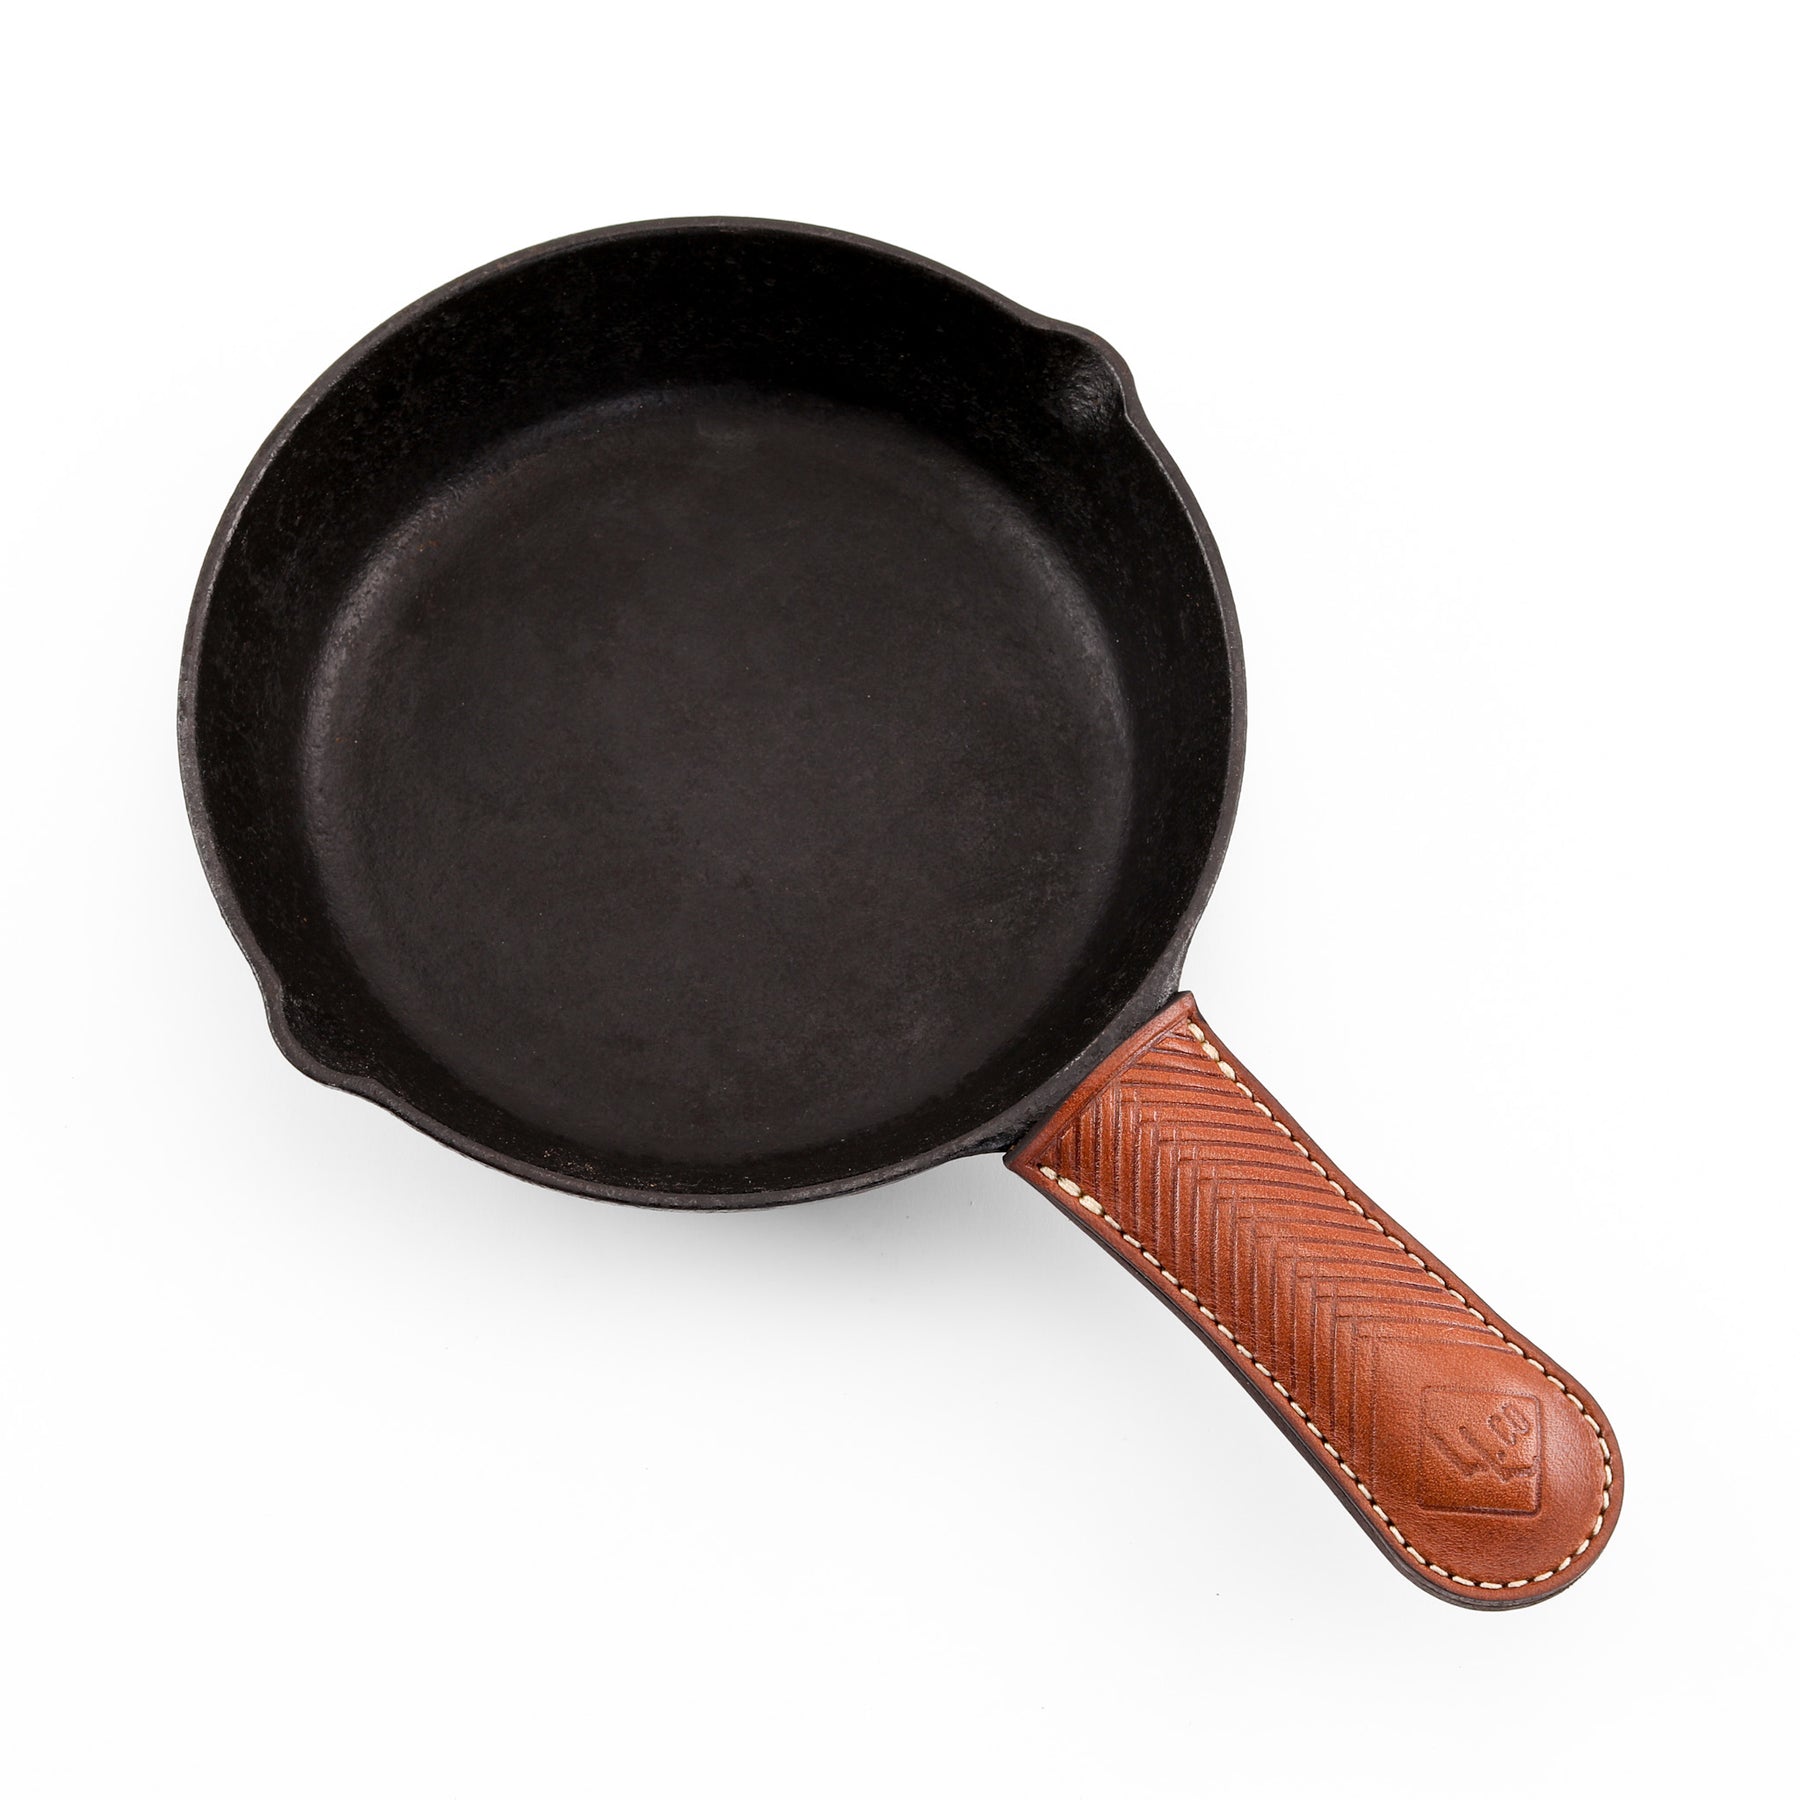  Leather Cast Iron Skillet Pan Handle Cover - Made In